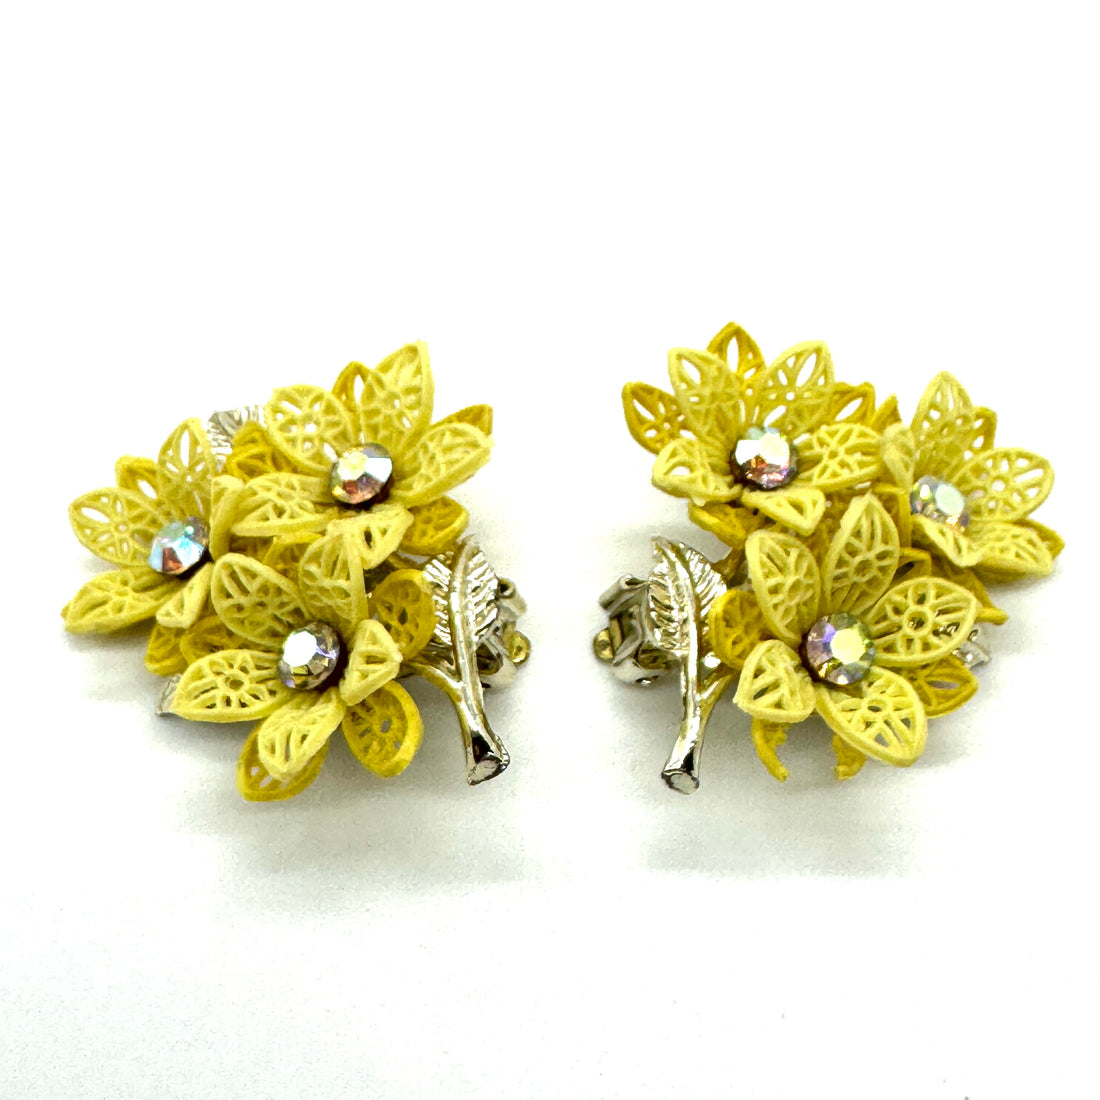 Vintage Yellow Foral Clip On Earrings - As IS *Final Sale